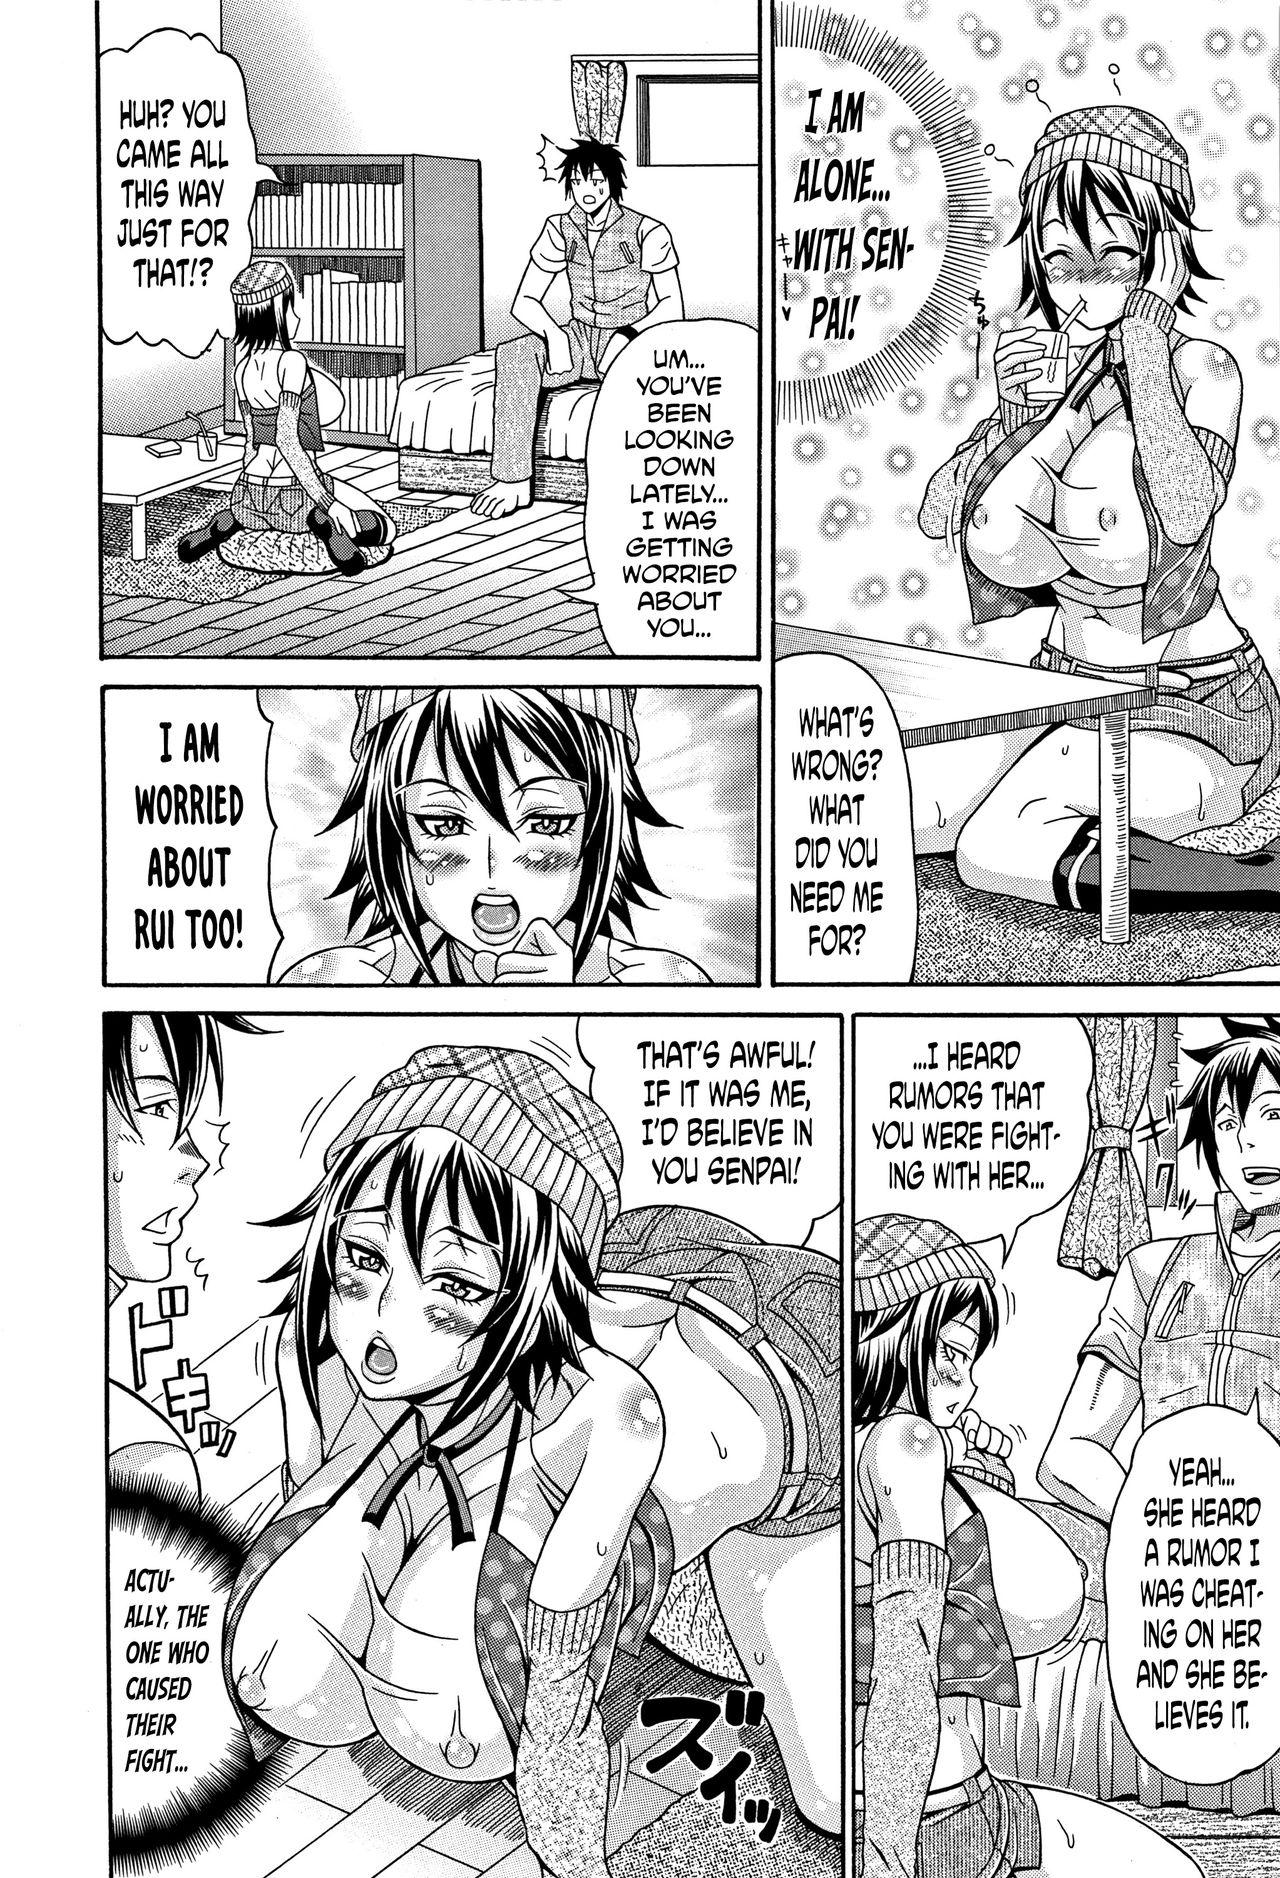 [Andou Hiroyuki] Mamire Chichi - Sticky Tits Feel Hot All Over. Ch.1-6 [English] [doujin-moe.us] 57